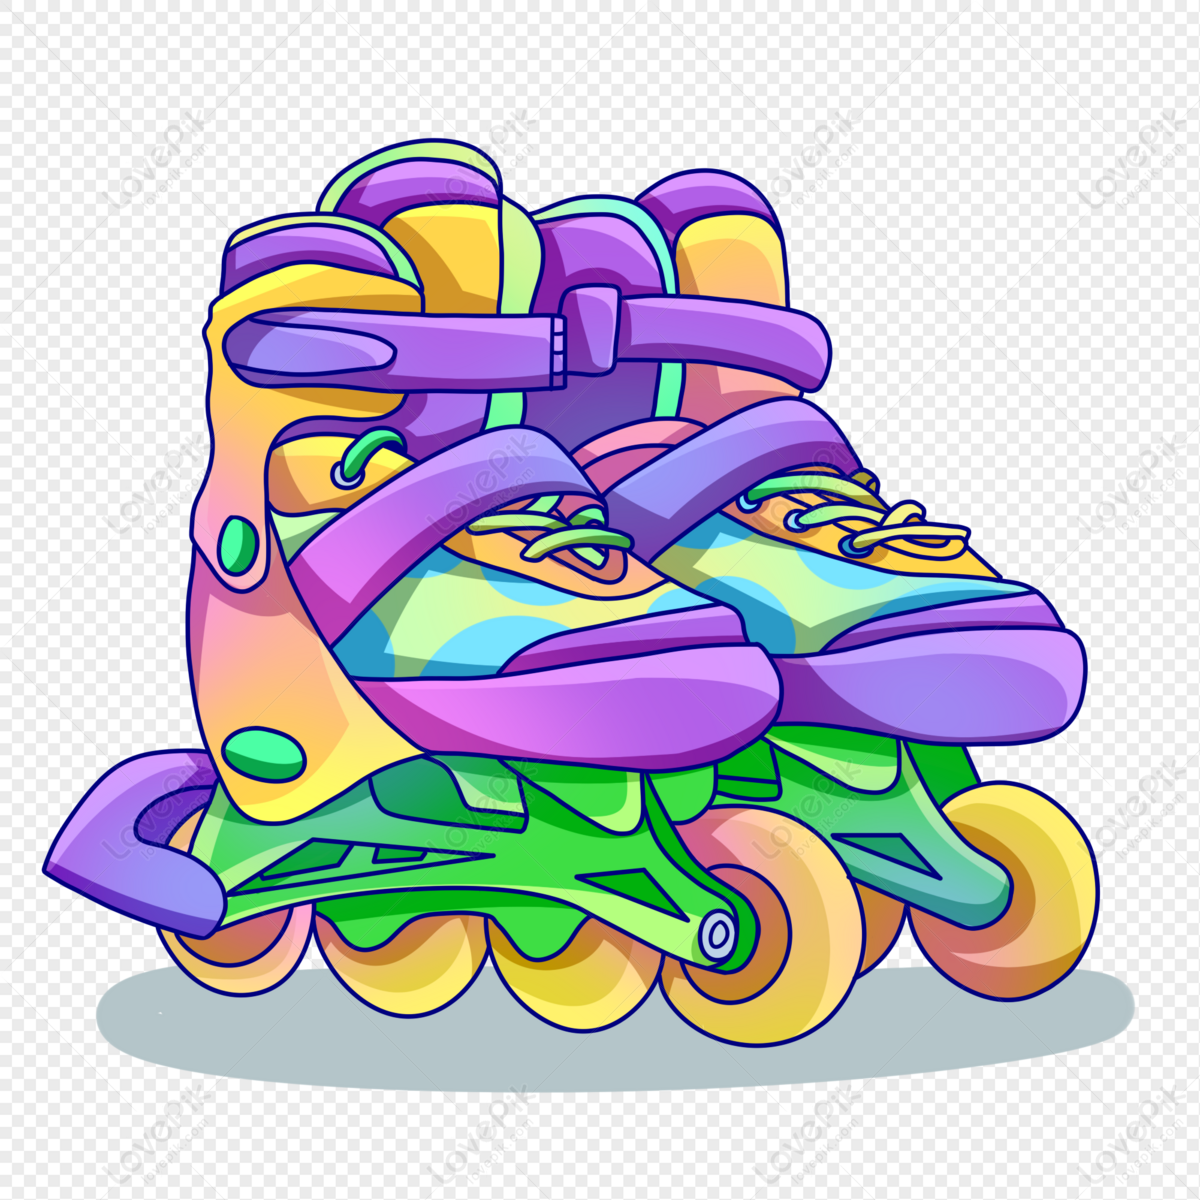 Cartoon Pair Of Roller Skates PNG Hd Transparent Image And Clipart Image  For Free Download - Lovepik | 401551504